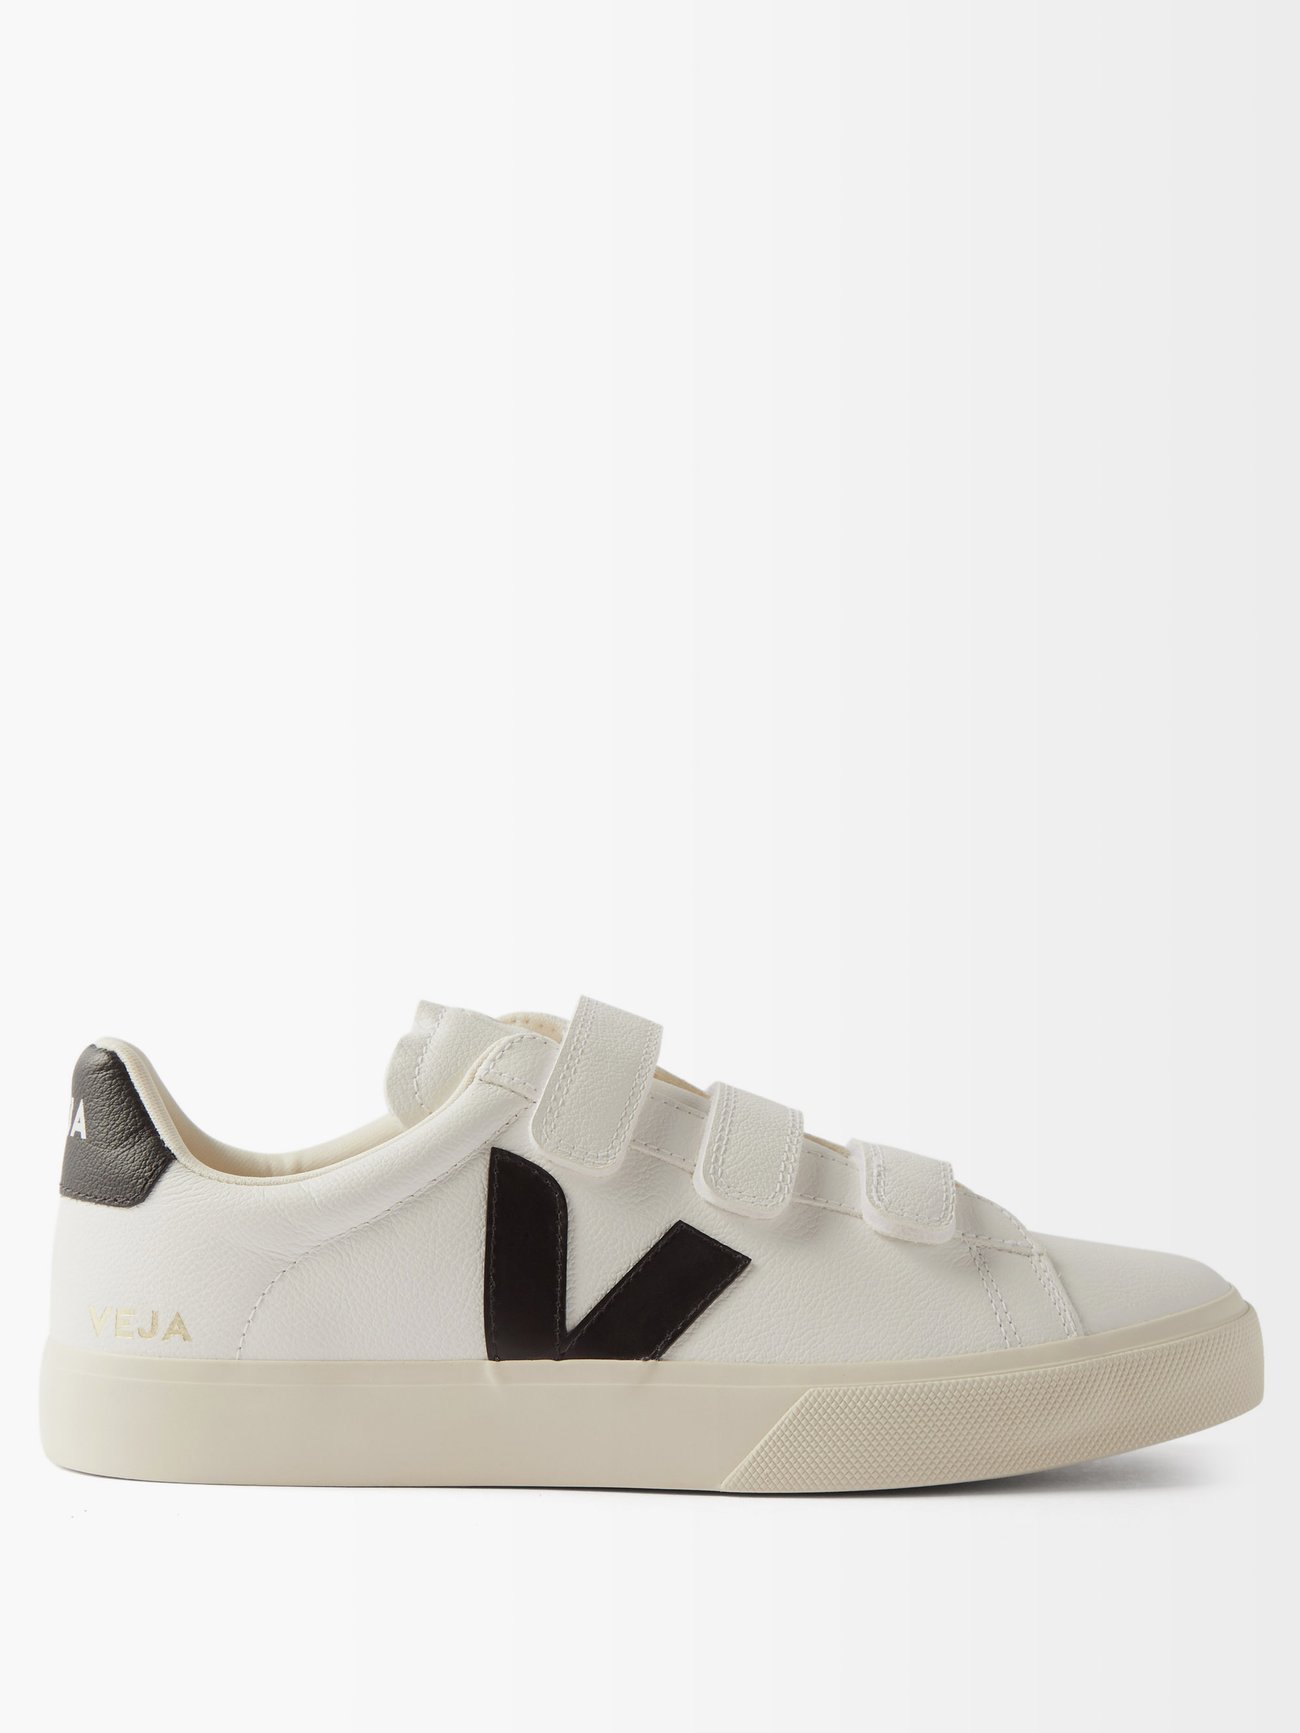 undefined | VEJA Recife velcro leather trainers